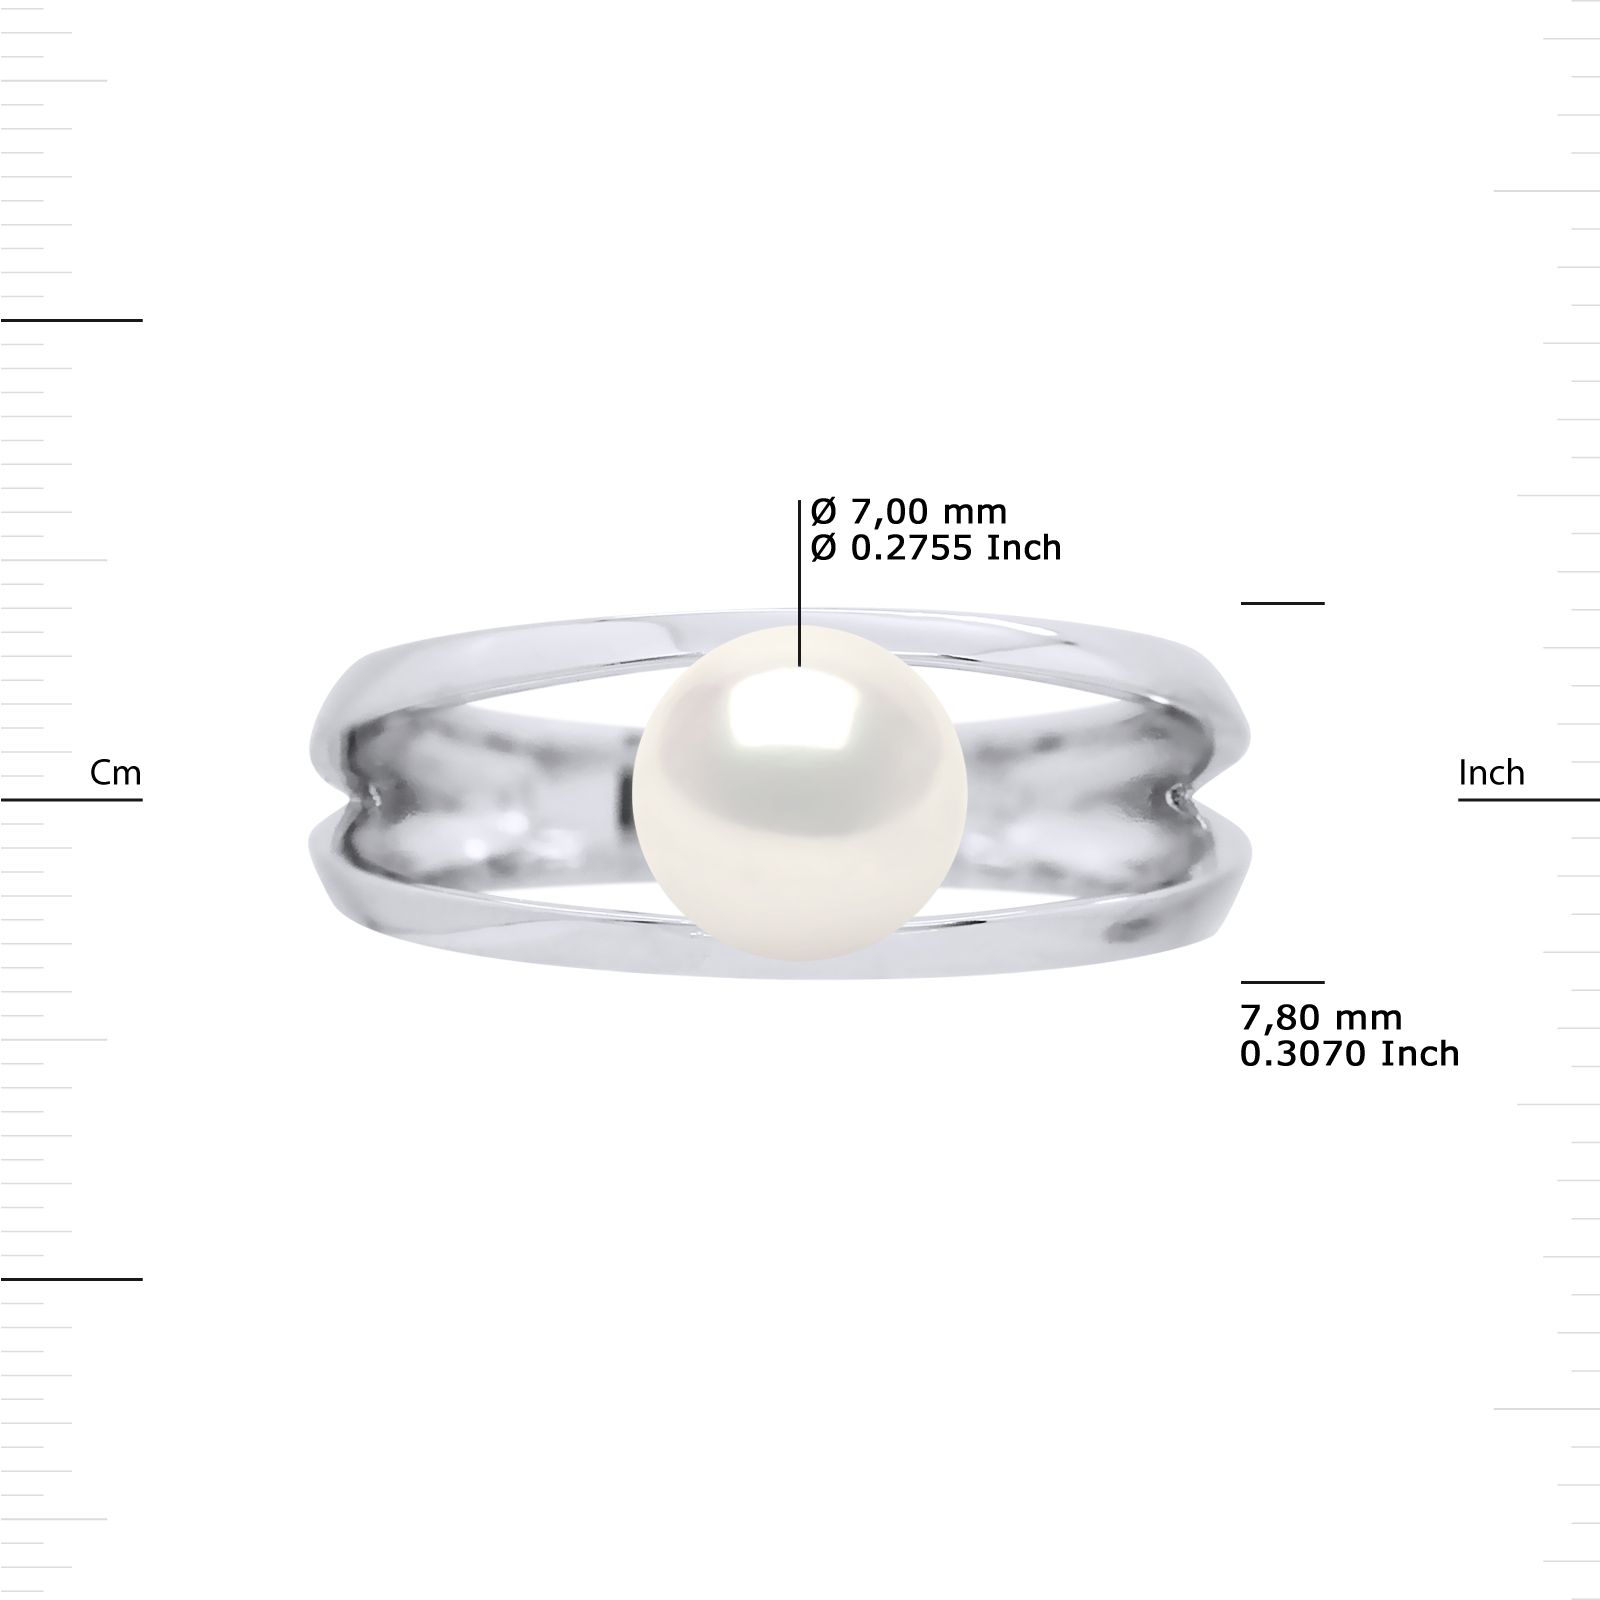 Ring White Gold 375 true Perle de Culture d'Eau Douce 7-8 mm - 0,31 in - Natural White Color Size avalaible from 48 to 62 , J to U - Our jewellery is made in France and will be delivered in a gift box accompanied by a Certificate of Authenticity and International Warranty